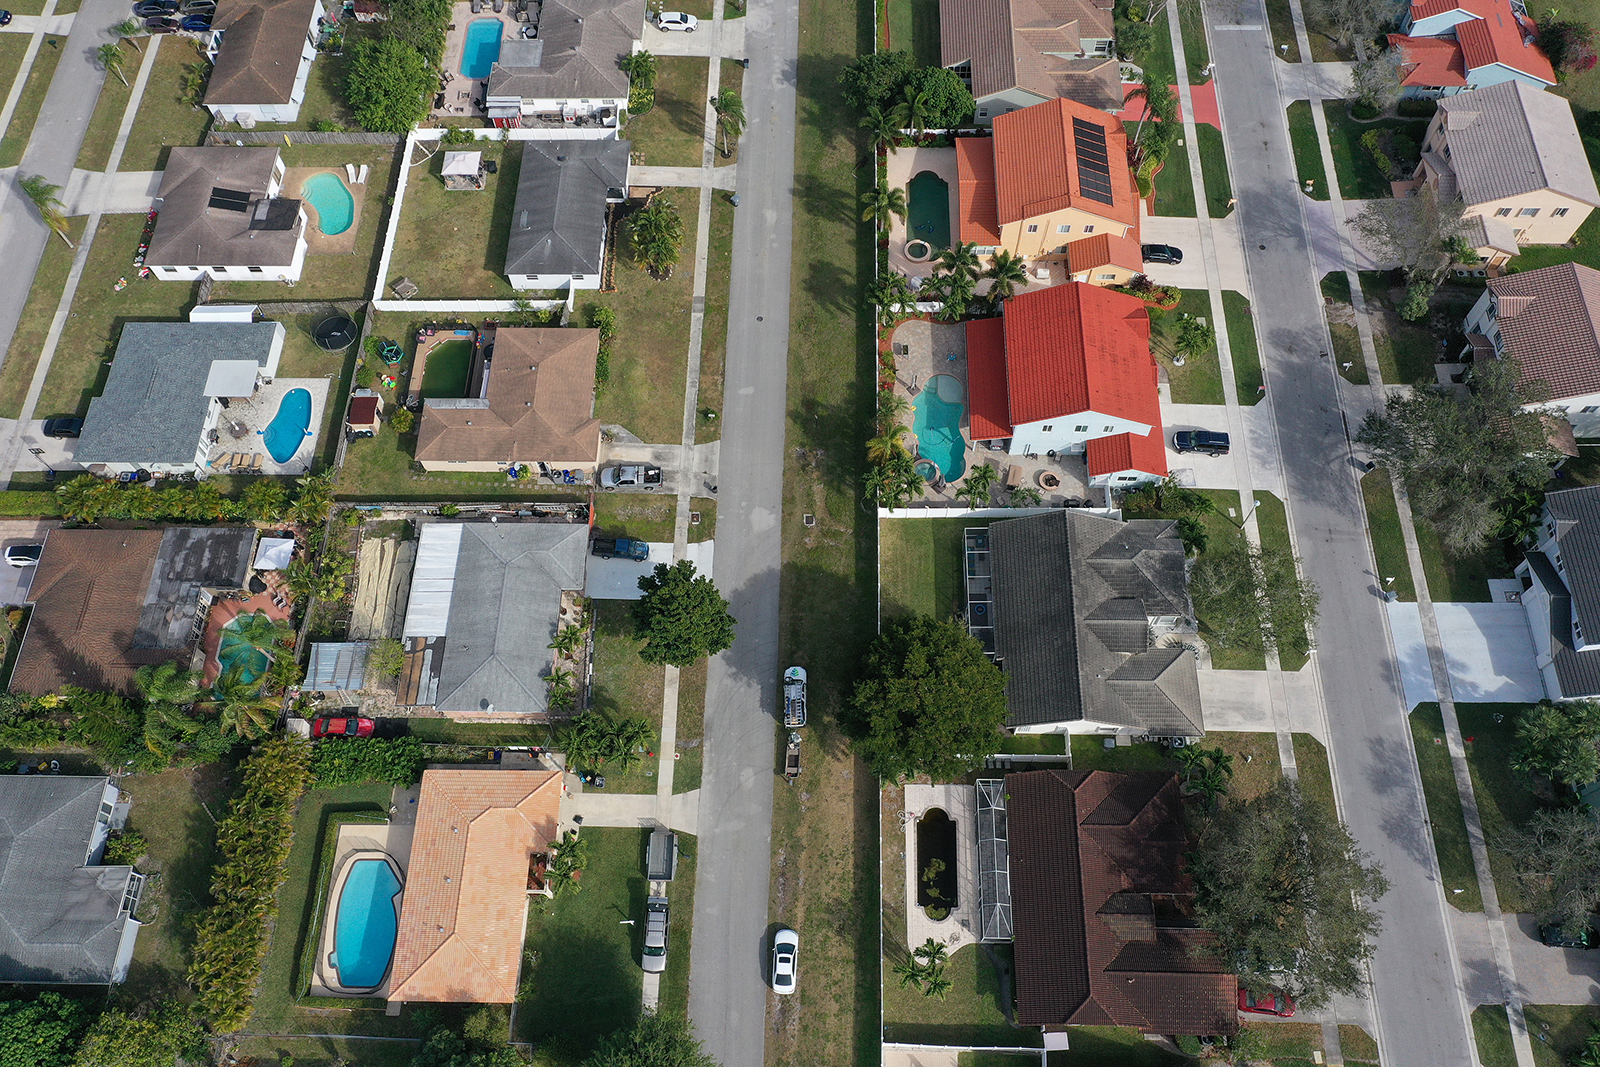 Homes sit on lots in a neighborhood on January 26 in Pembroke Pines, Florida. 